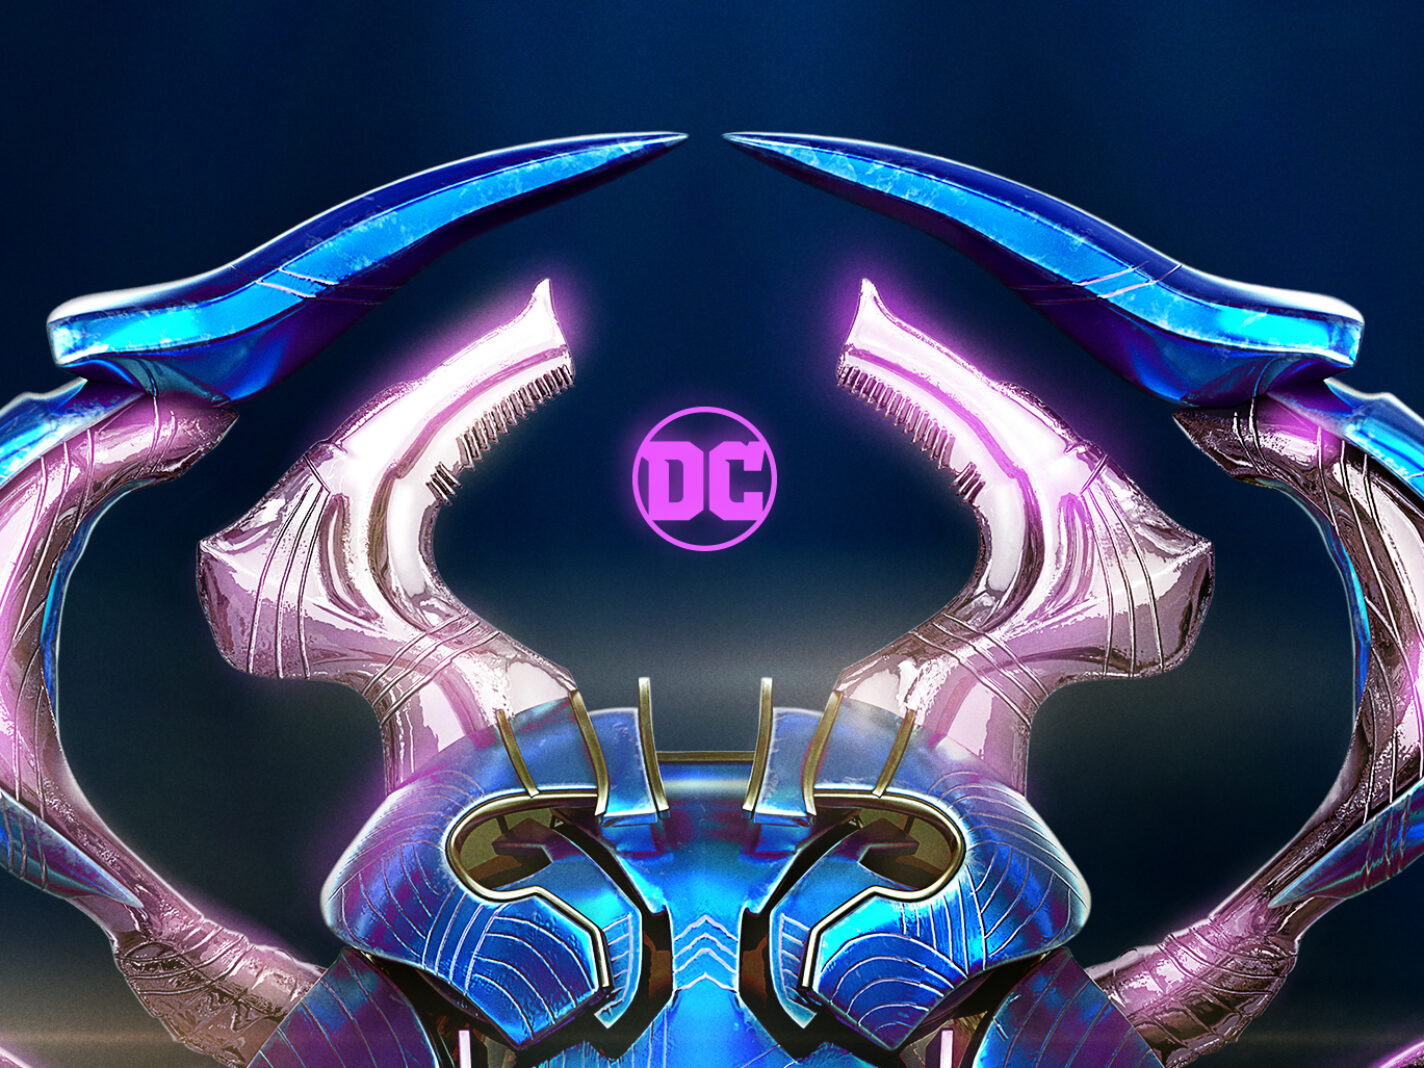 Blue Beetle Poster Teases the Scarab in DC Universe Movie